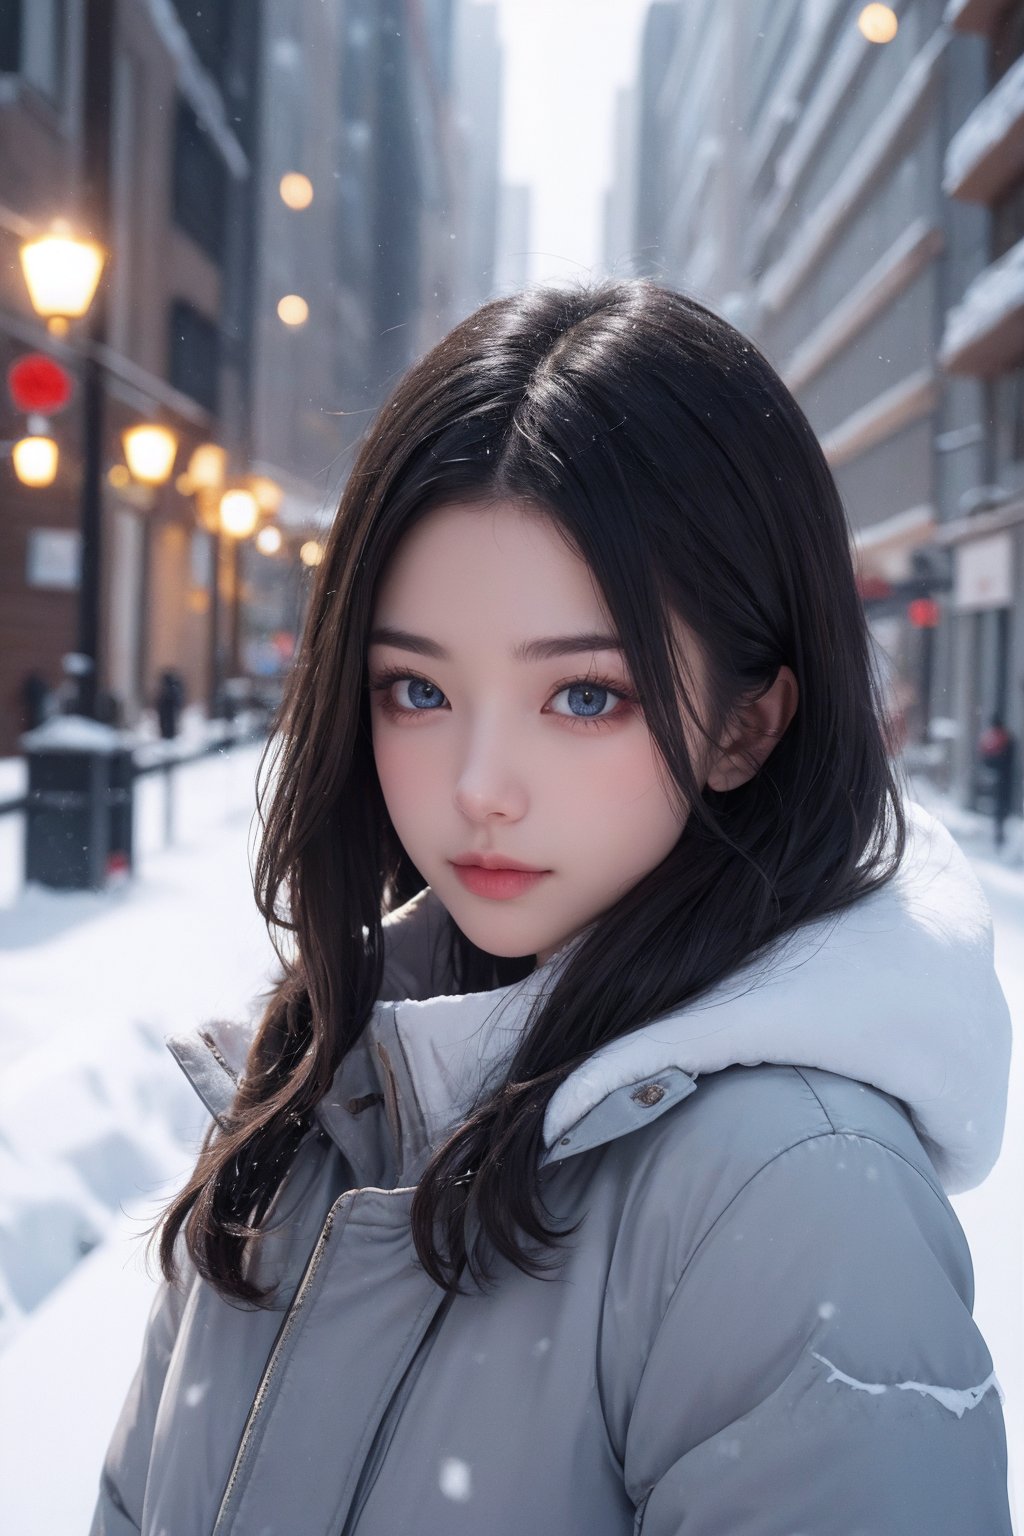 8k, ultra highres, real light and shadow, beautiful eyes, beautiful women, in the snow scene in winter, street